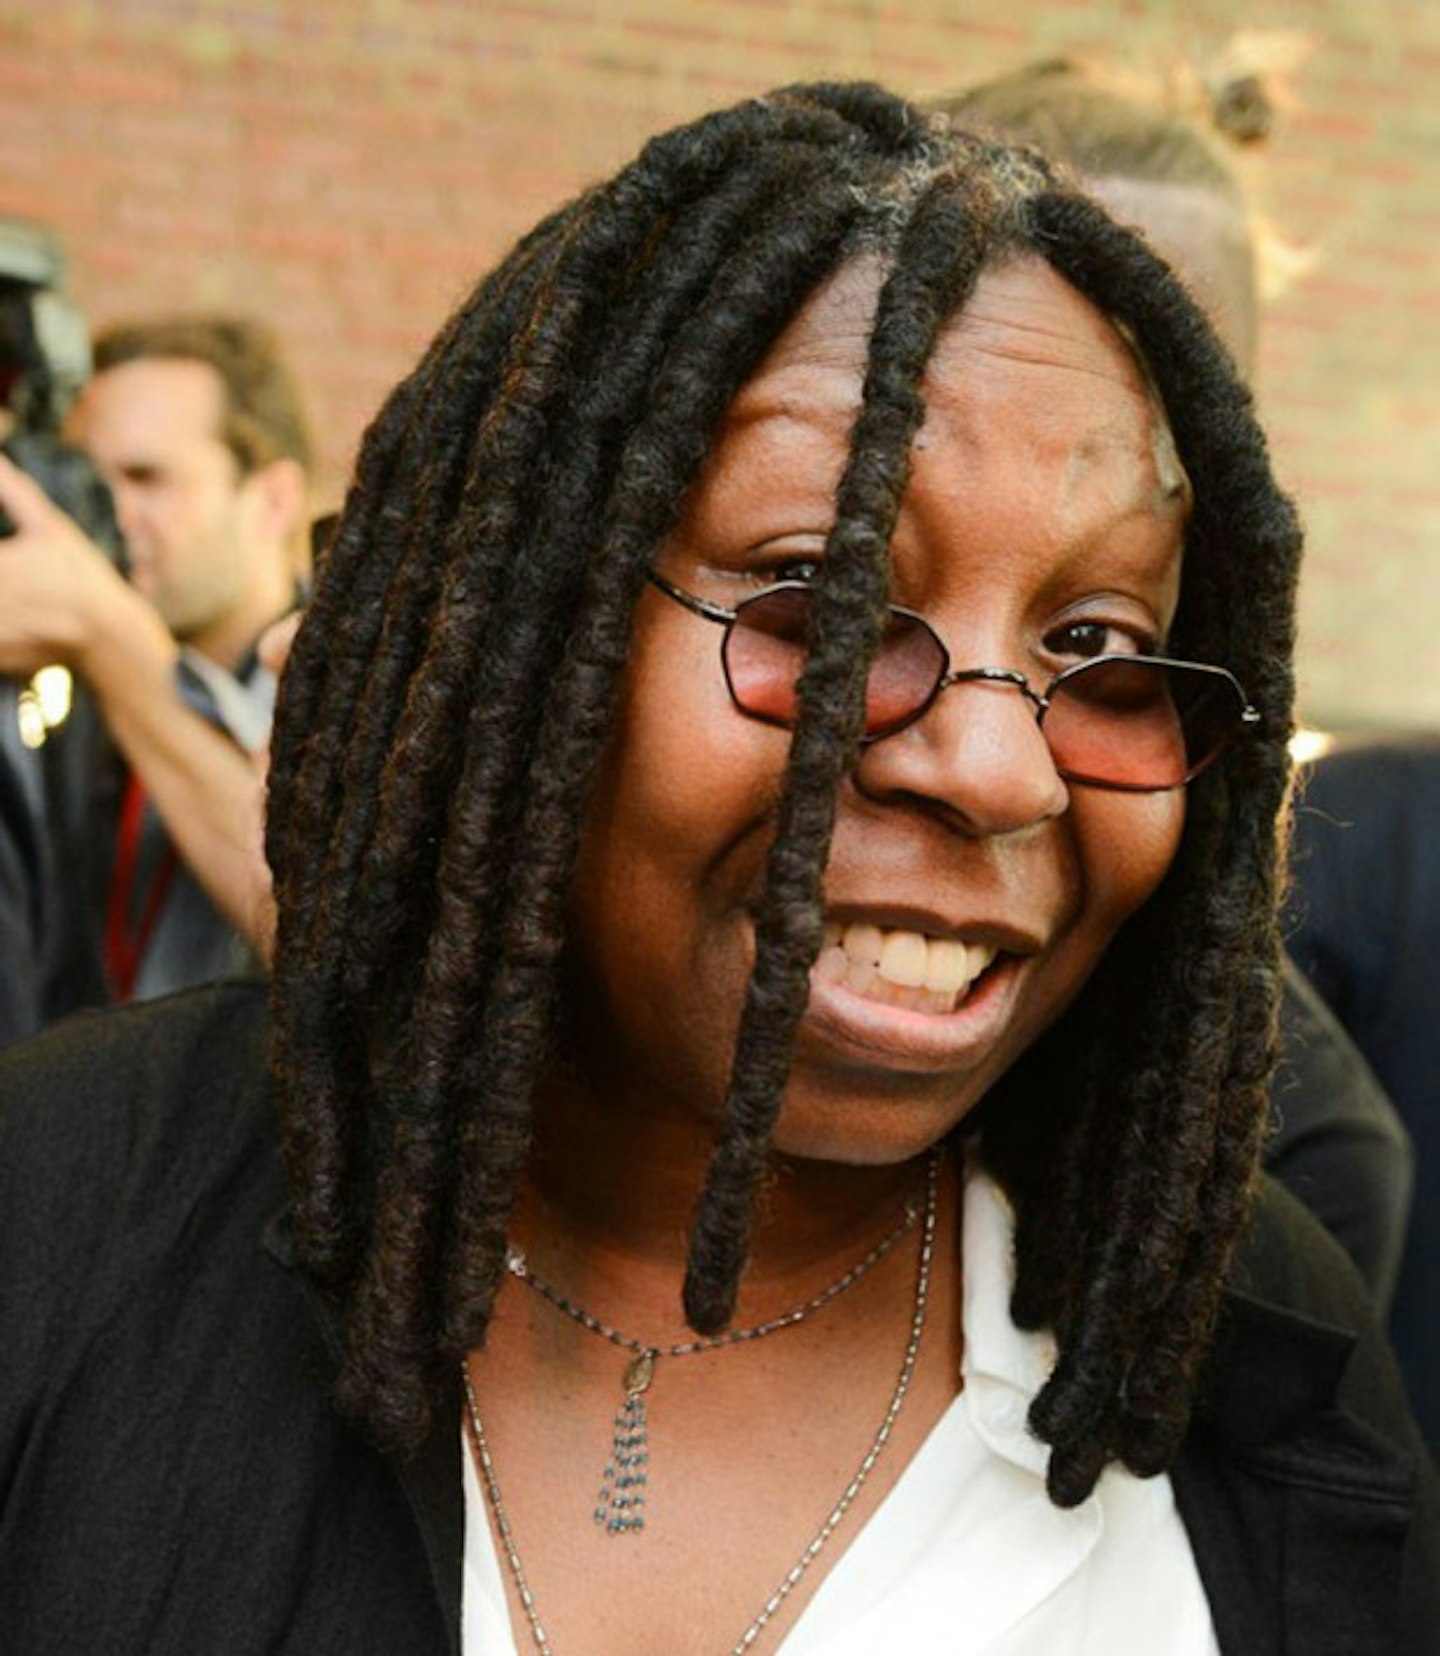 Whoopi Goldberg was there!